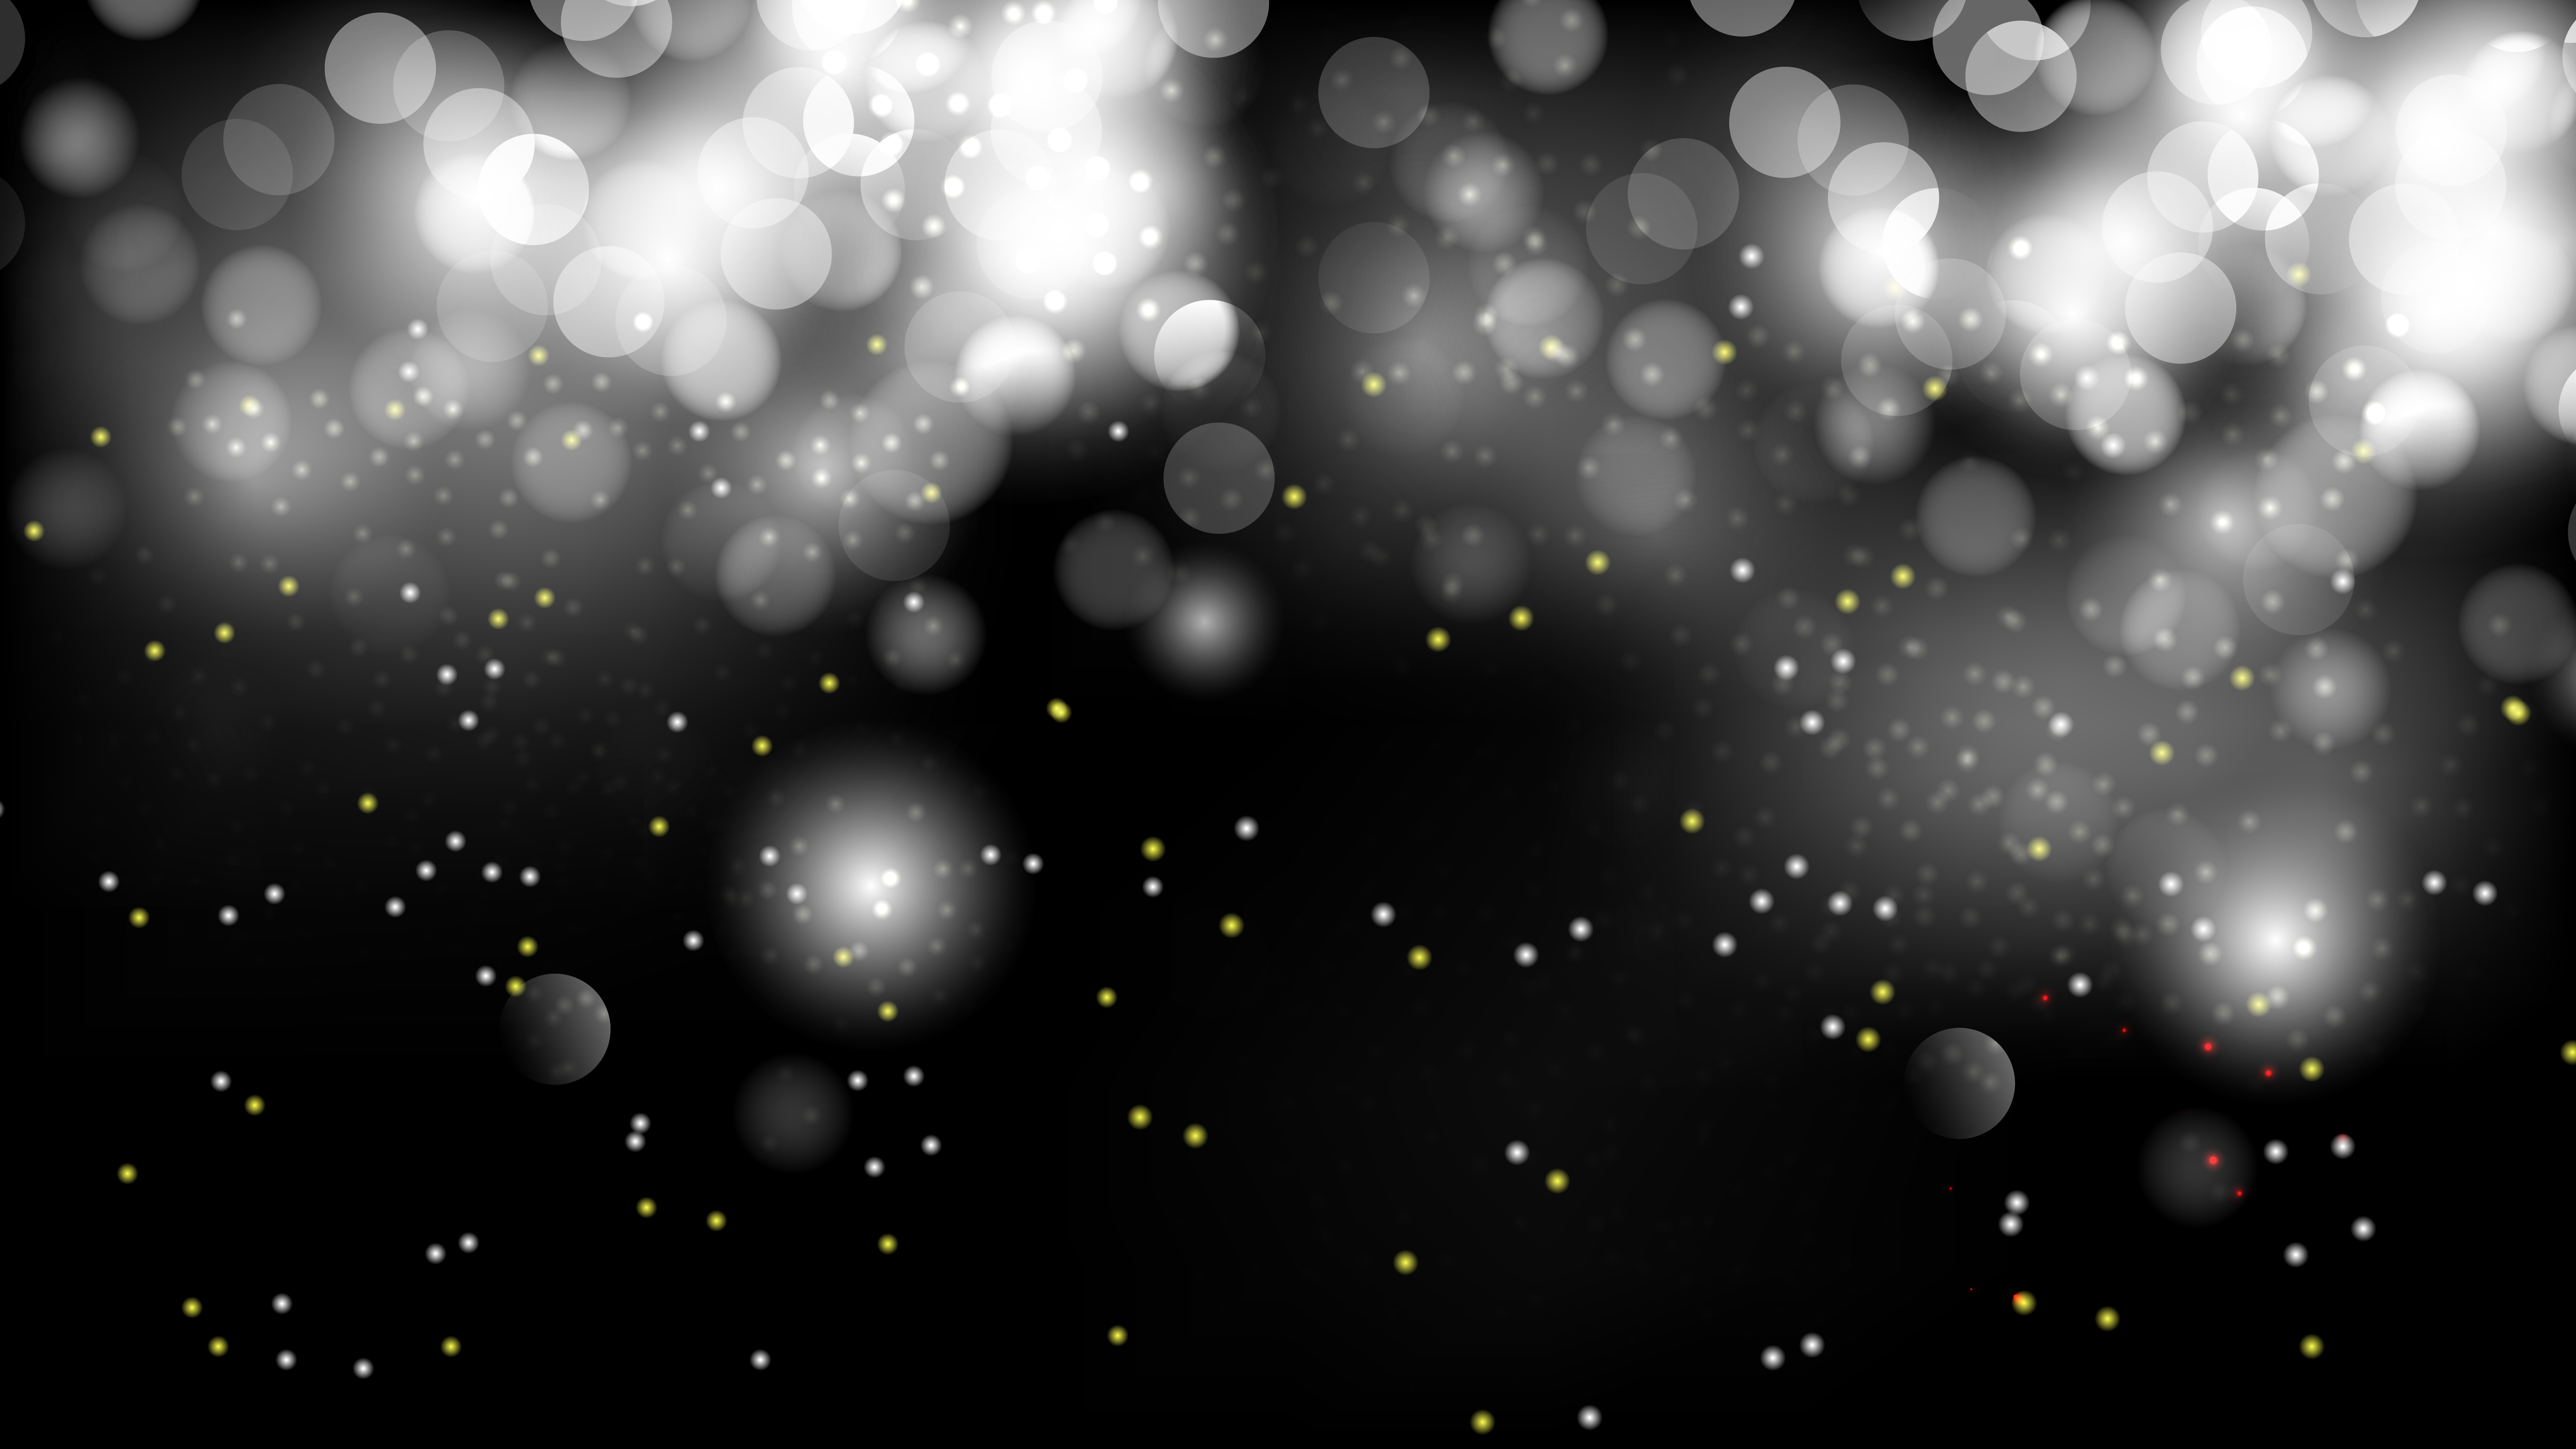 Free Abstract Black and White Bokeh Defocused Lights Background Vector Image